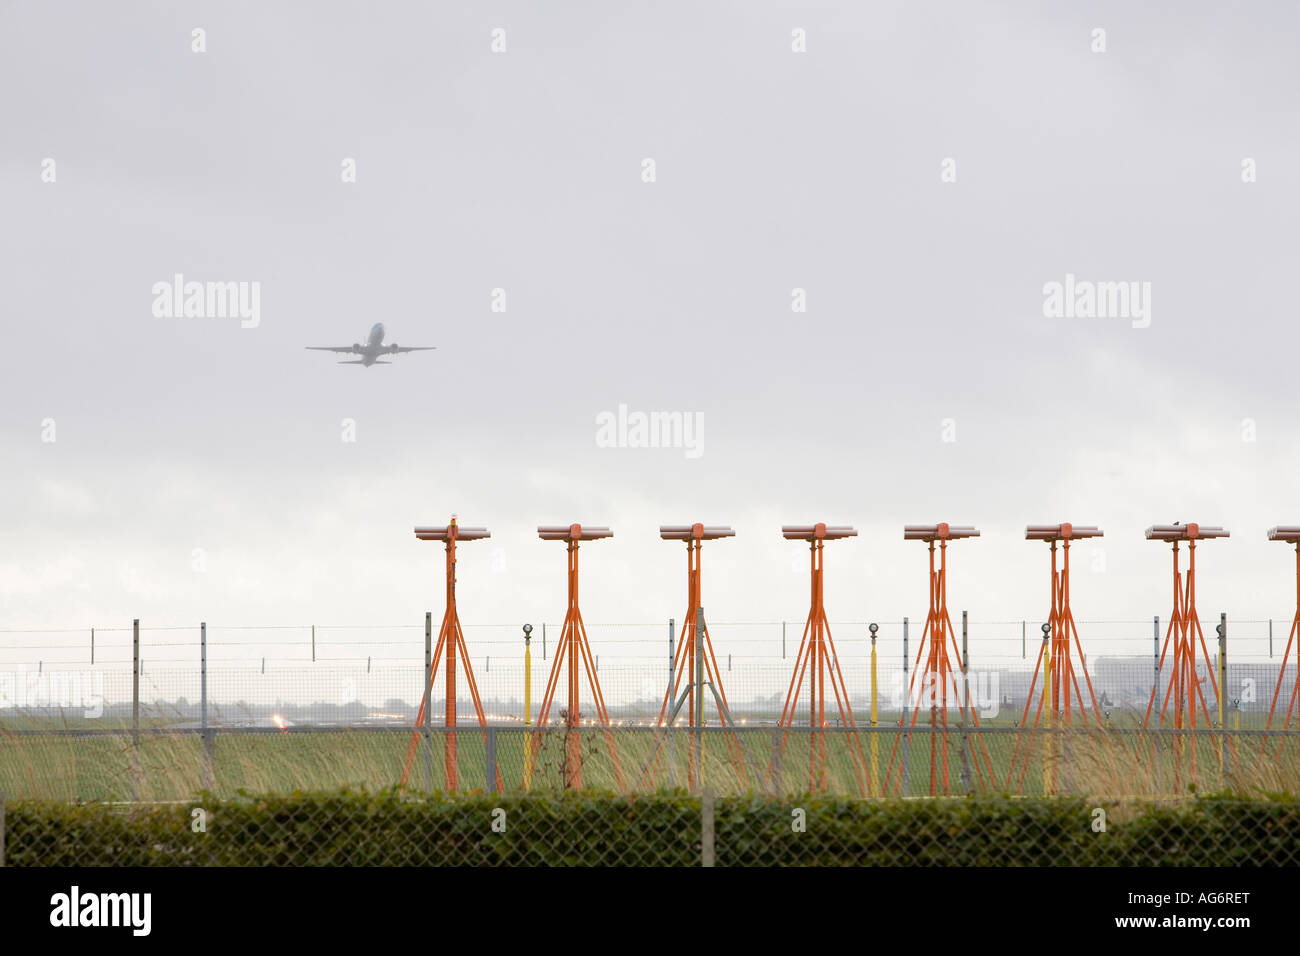 A plane takes off from Heathrow the worlds busiest airport Stock Photo